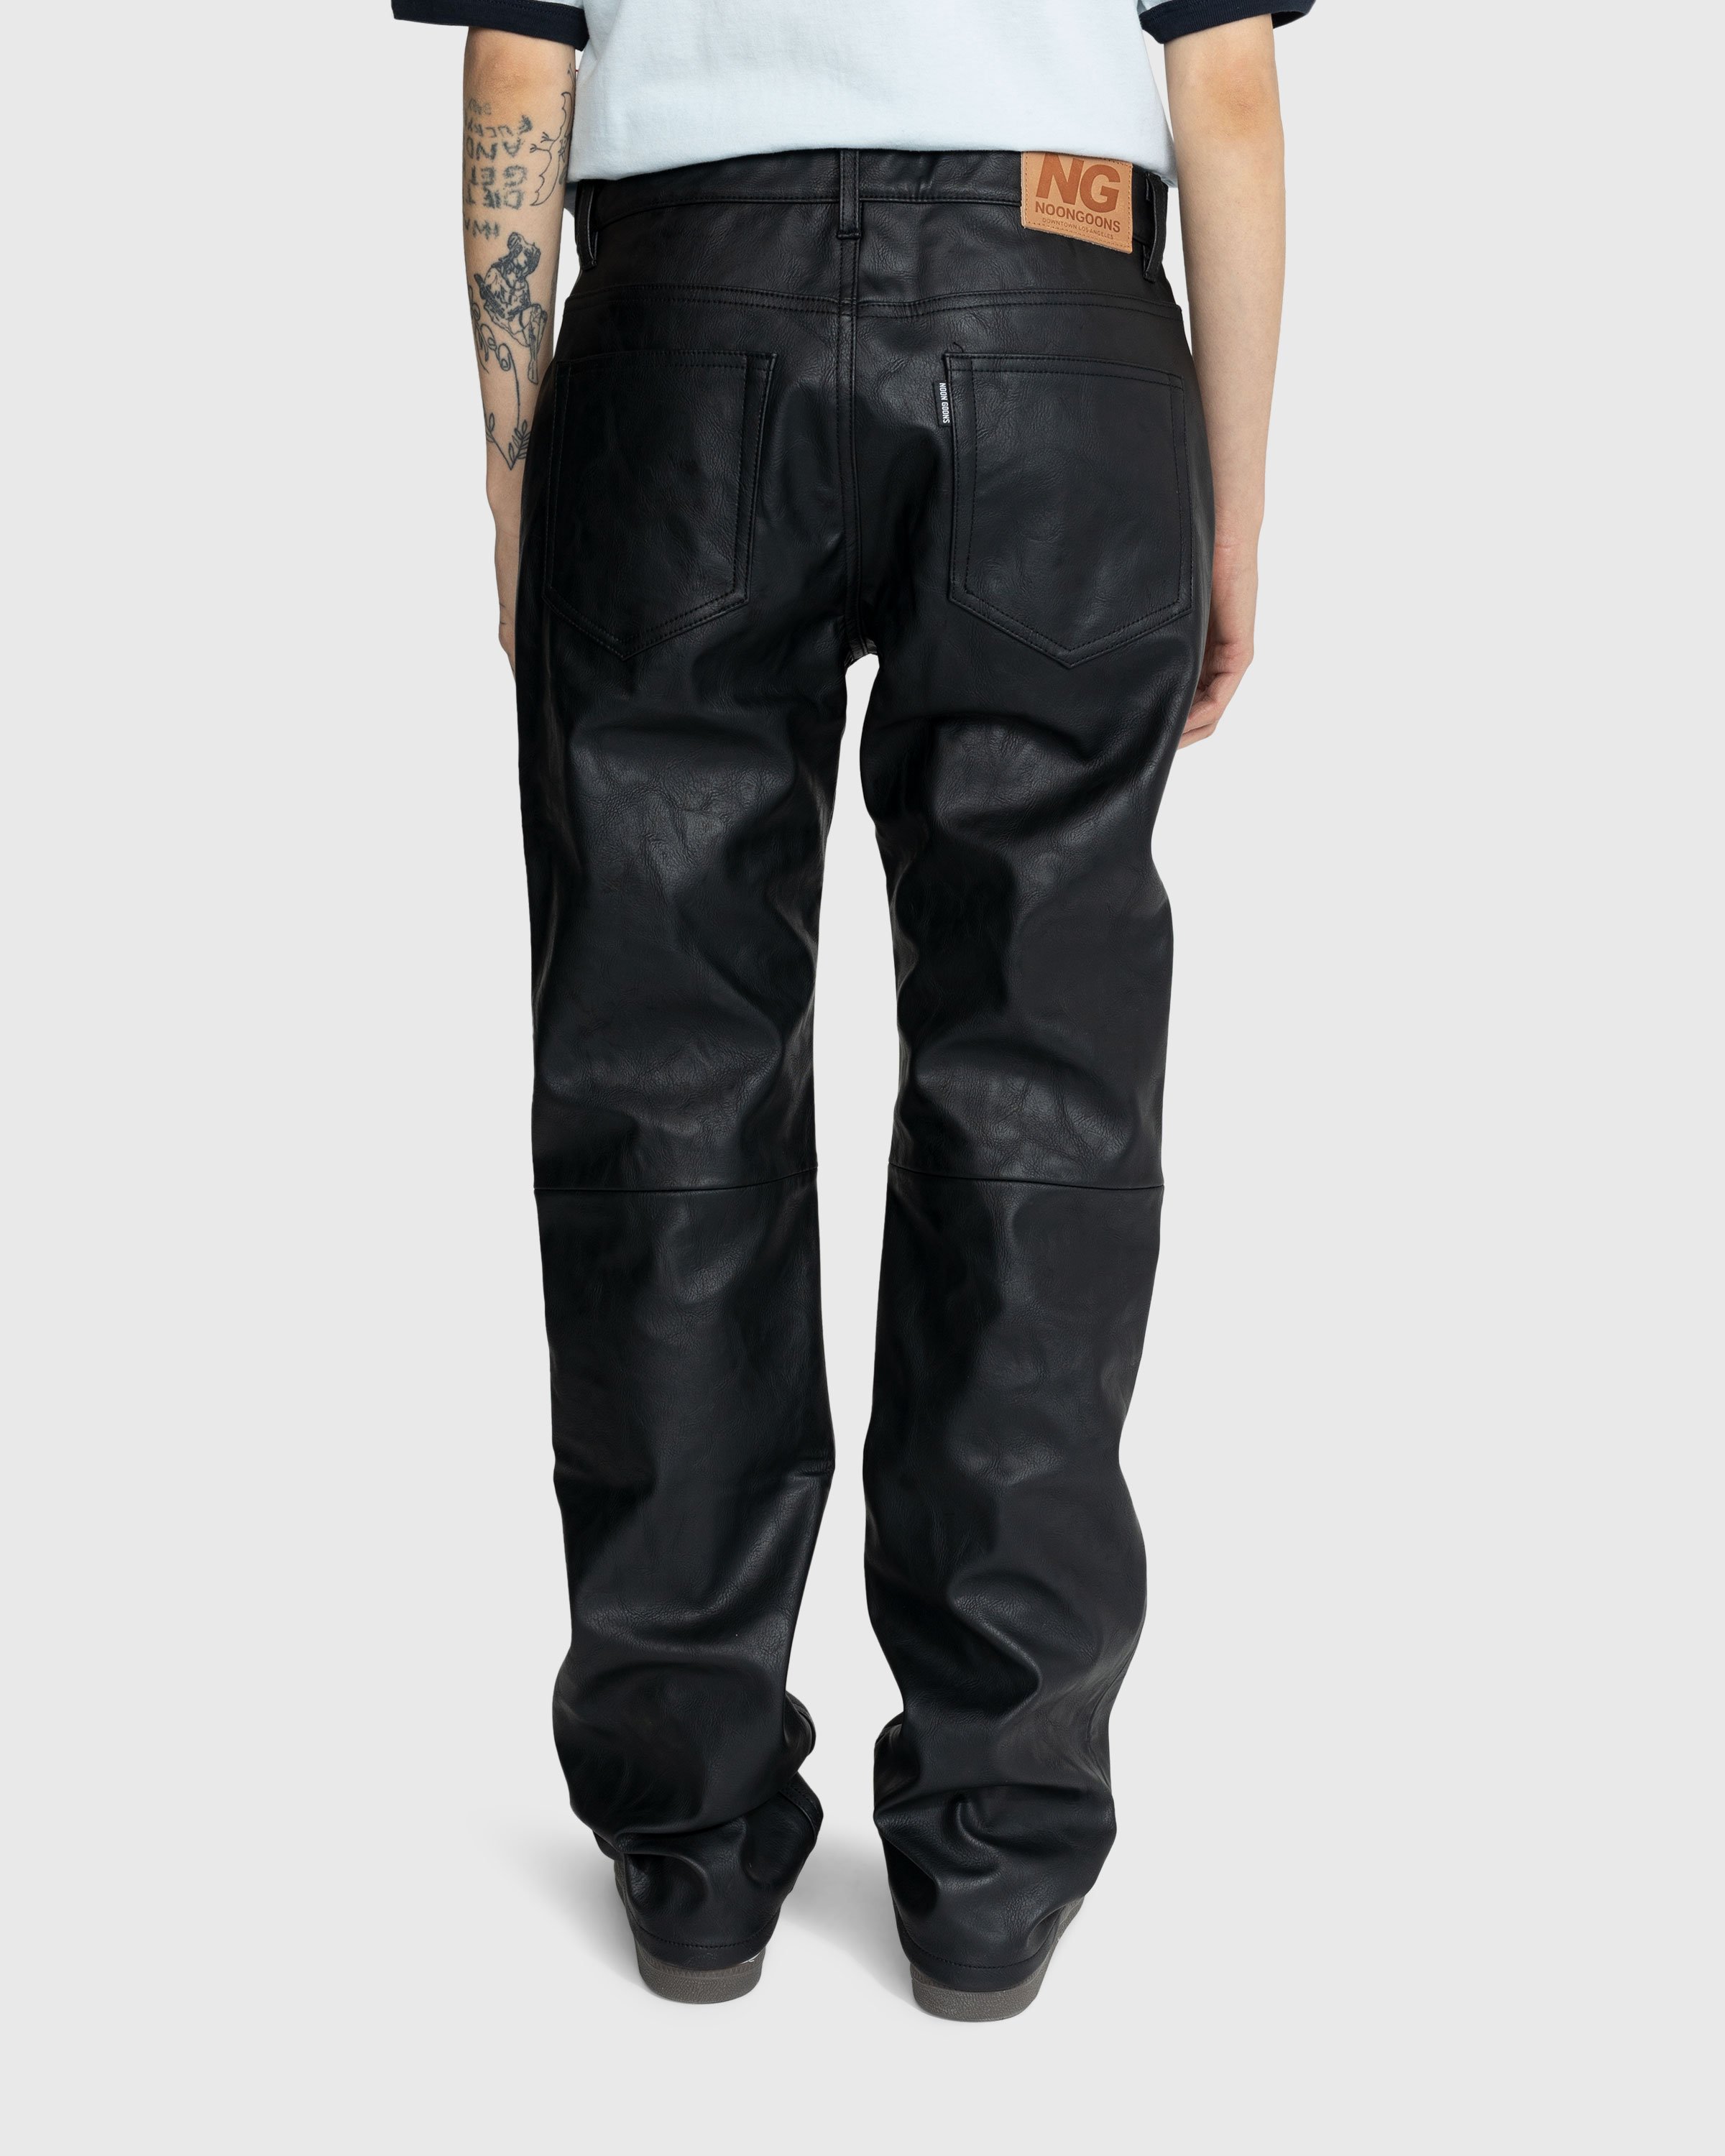 Noon Goons - GP Faux Leather Pant Black - Clothing - Black - Image 4